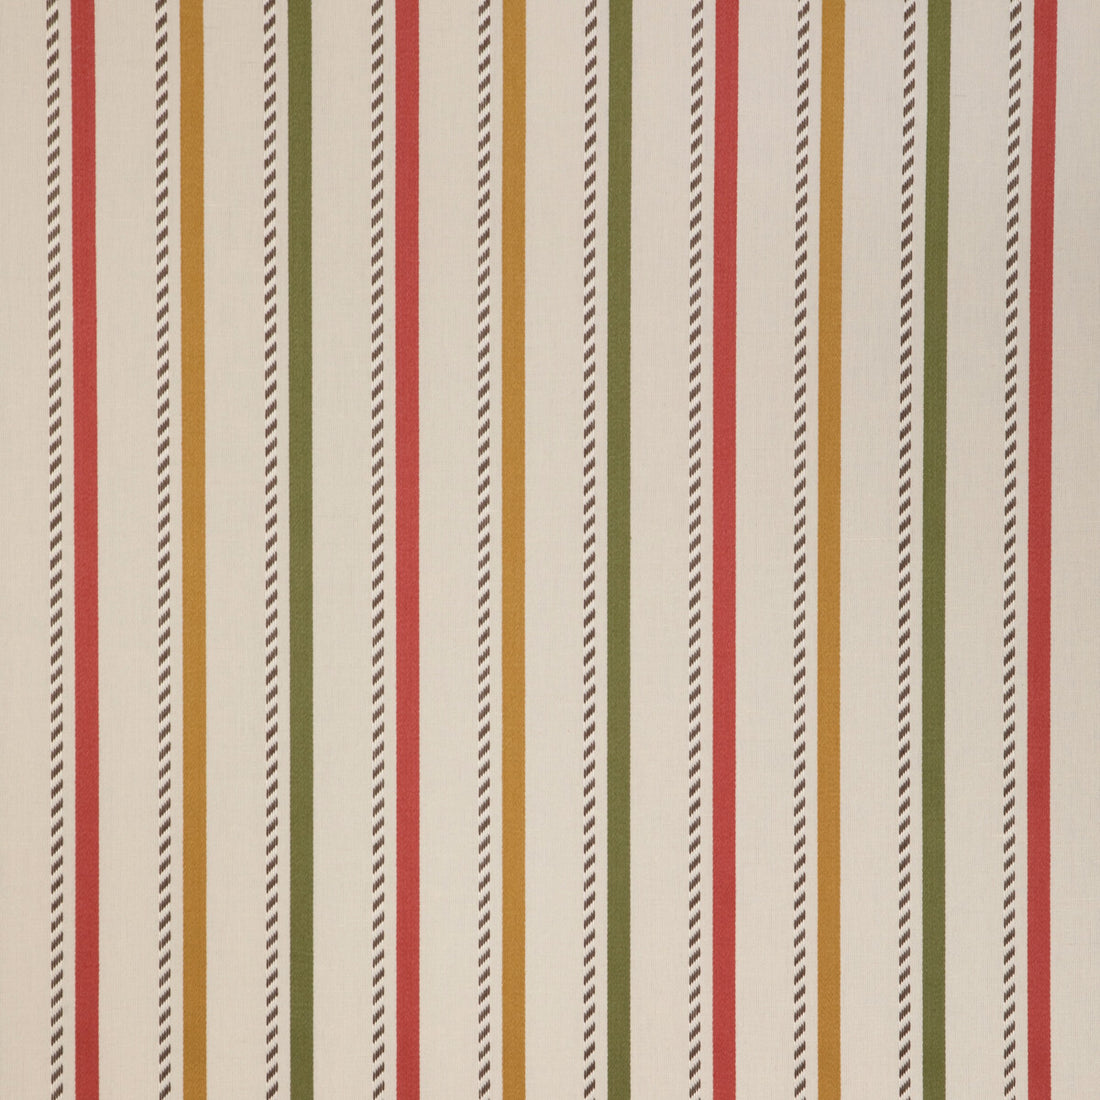 Buxton Stripe fabric in red/gold color - pattern 2023106.194.0 - by Lee Jofa in the Highfield Stripes And Plaids collection